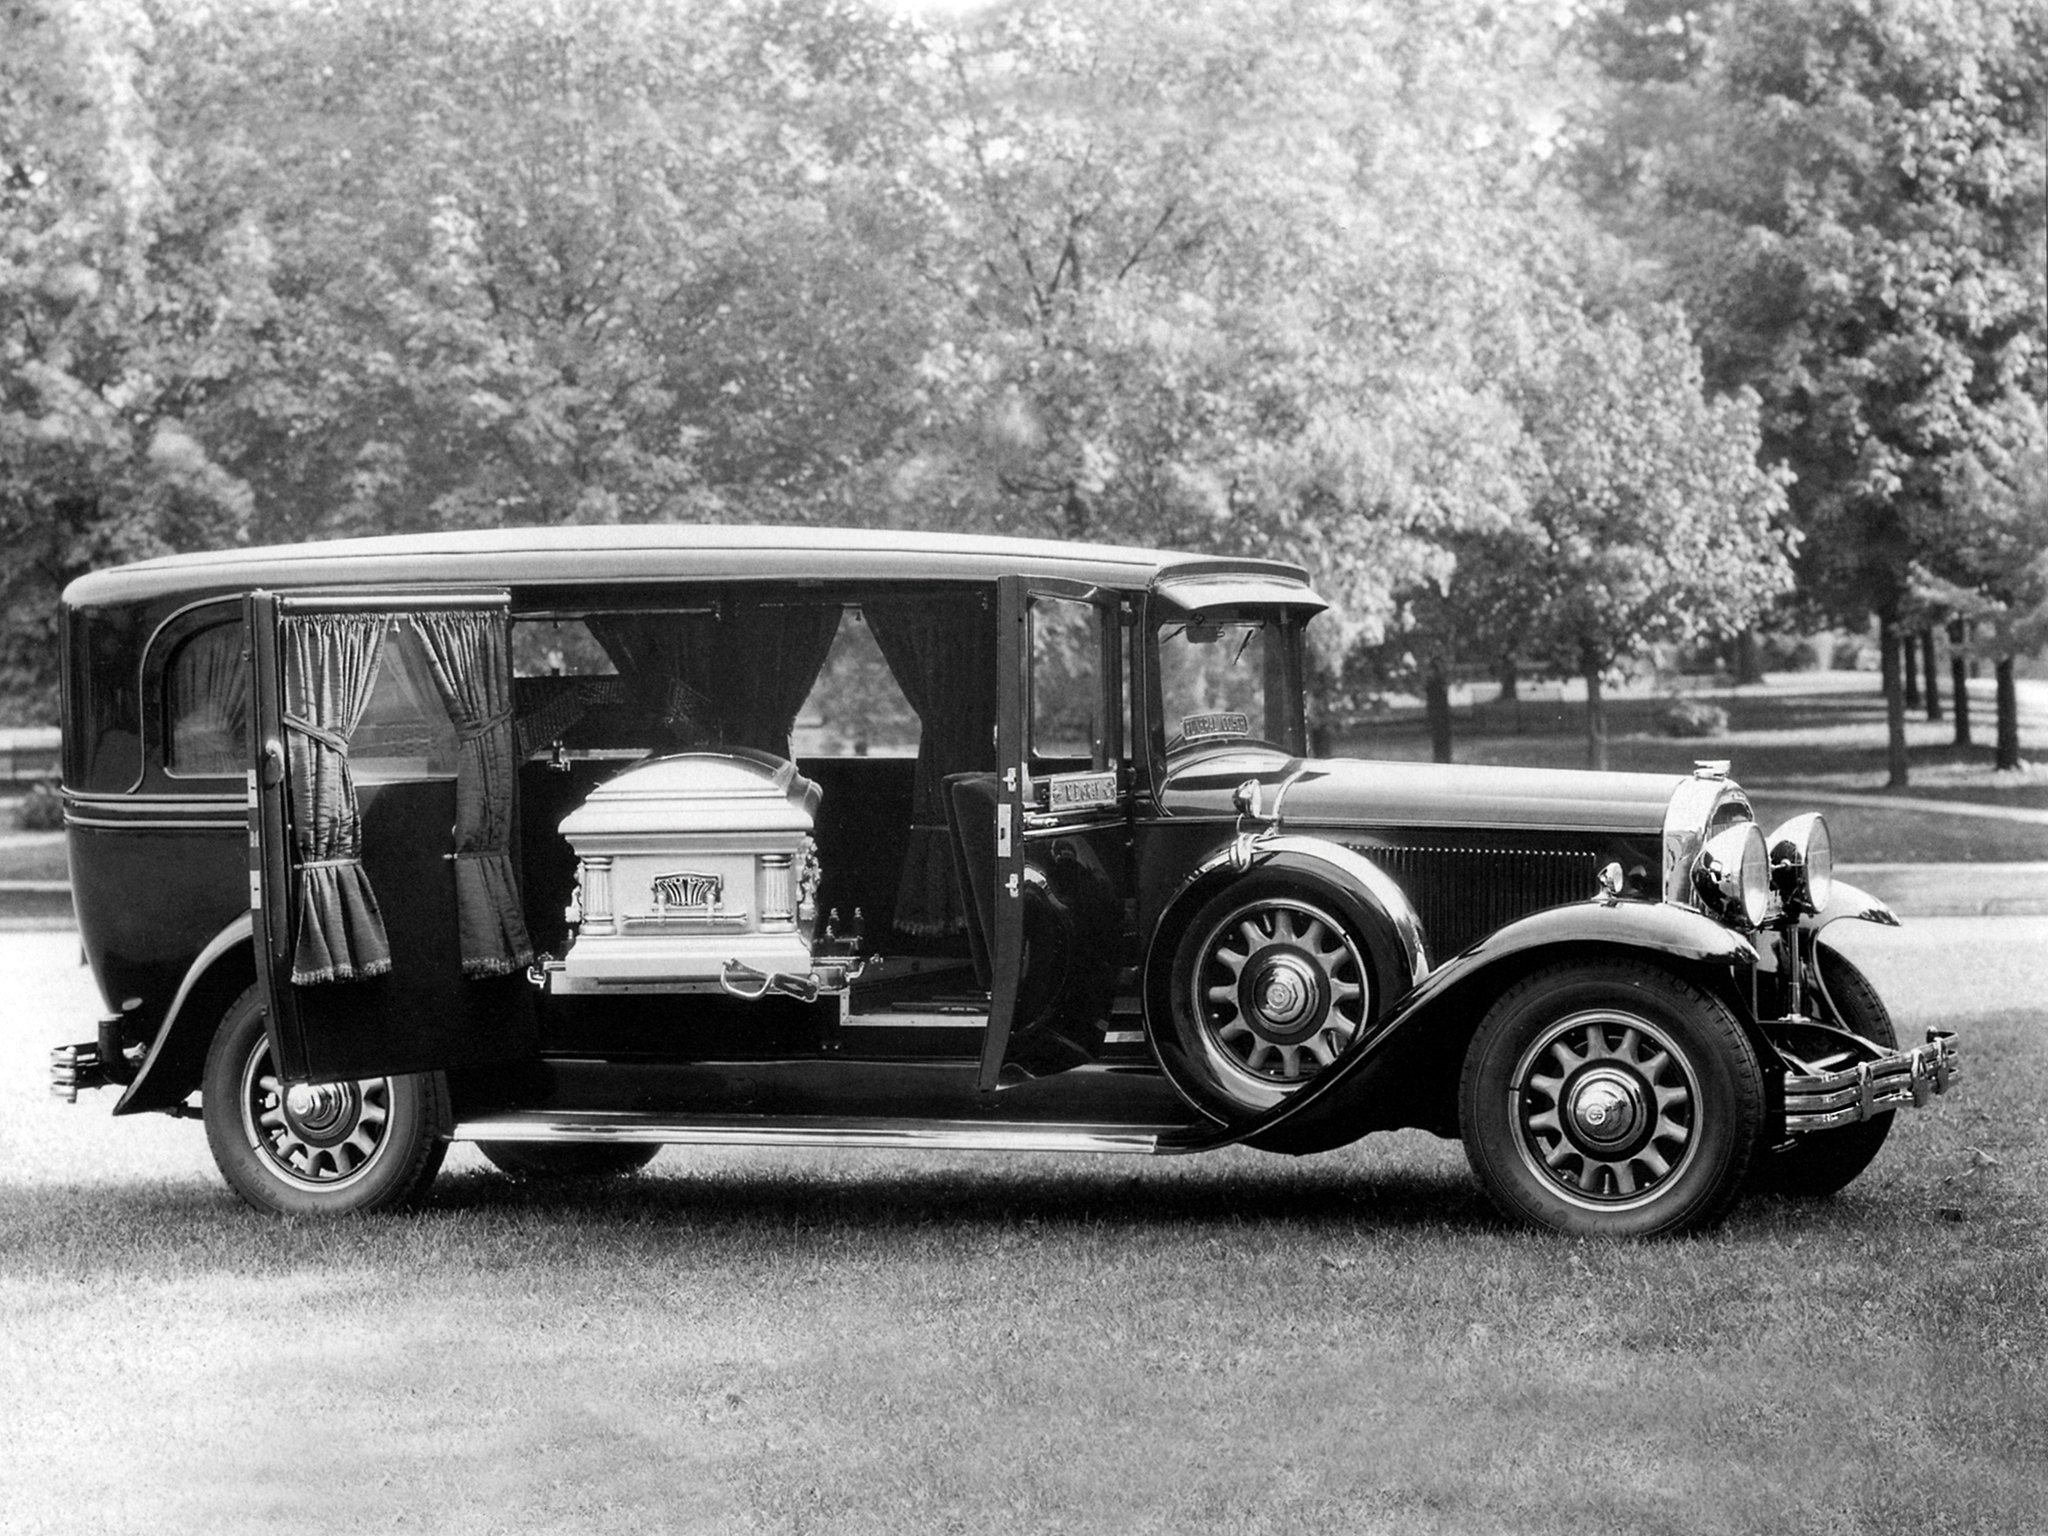 1931, Flxible, Buick, Series 90, Side servicing, Hearse, Stationwagon, Emergency, Retro, Ambulance Wallpaper